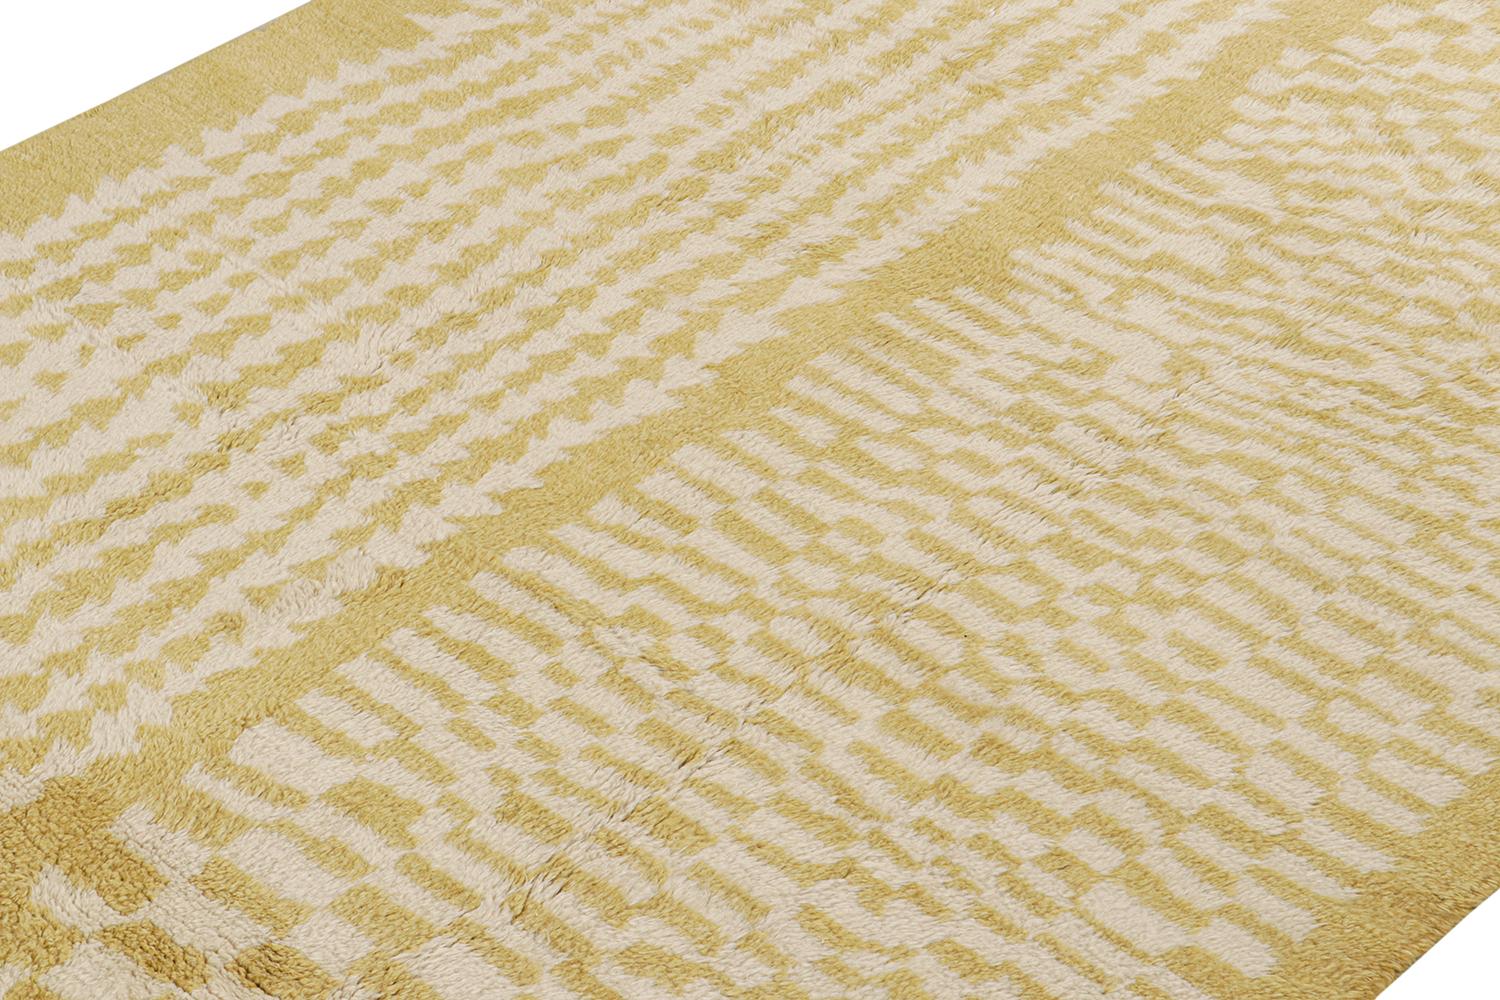 This contemporary 8x10 rug is a new addition to Rug & Kilim’s Moroccan rug collection. 

On the Design:

The piece enjoys a simple geometric pattern in white and mustard geometric patterns, inspired by primitivist geometry. Its texture, too, is